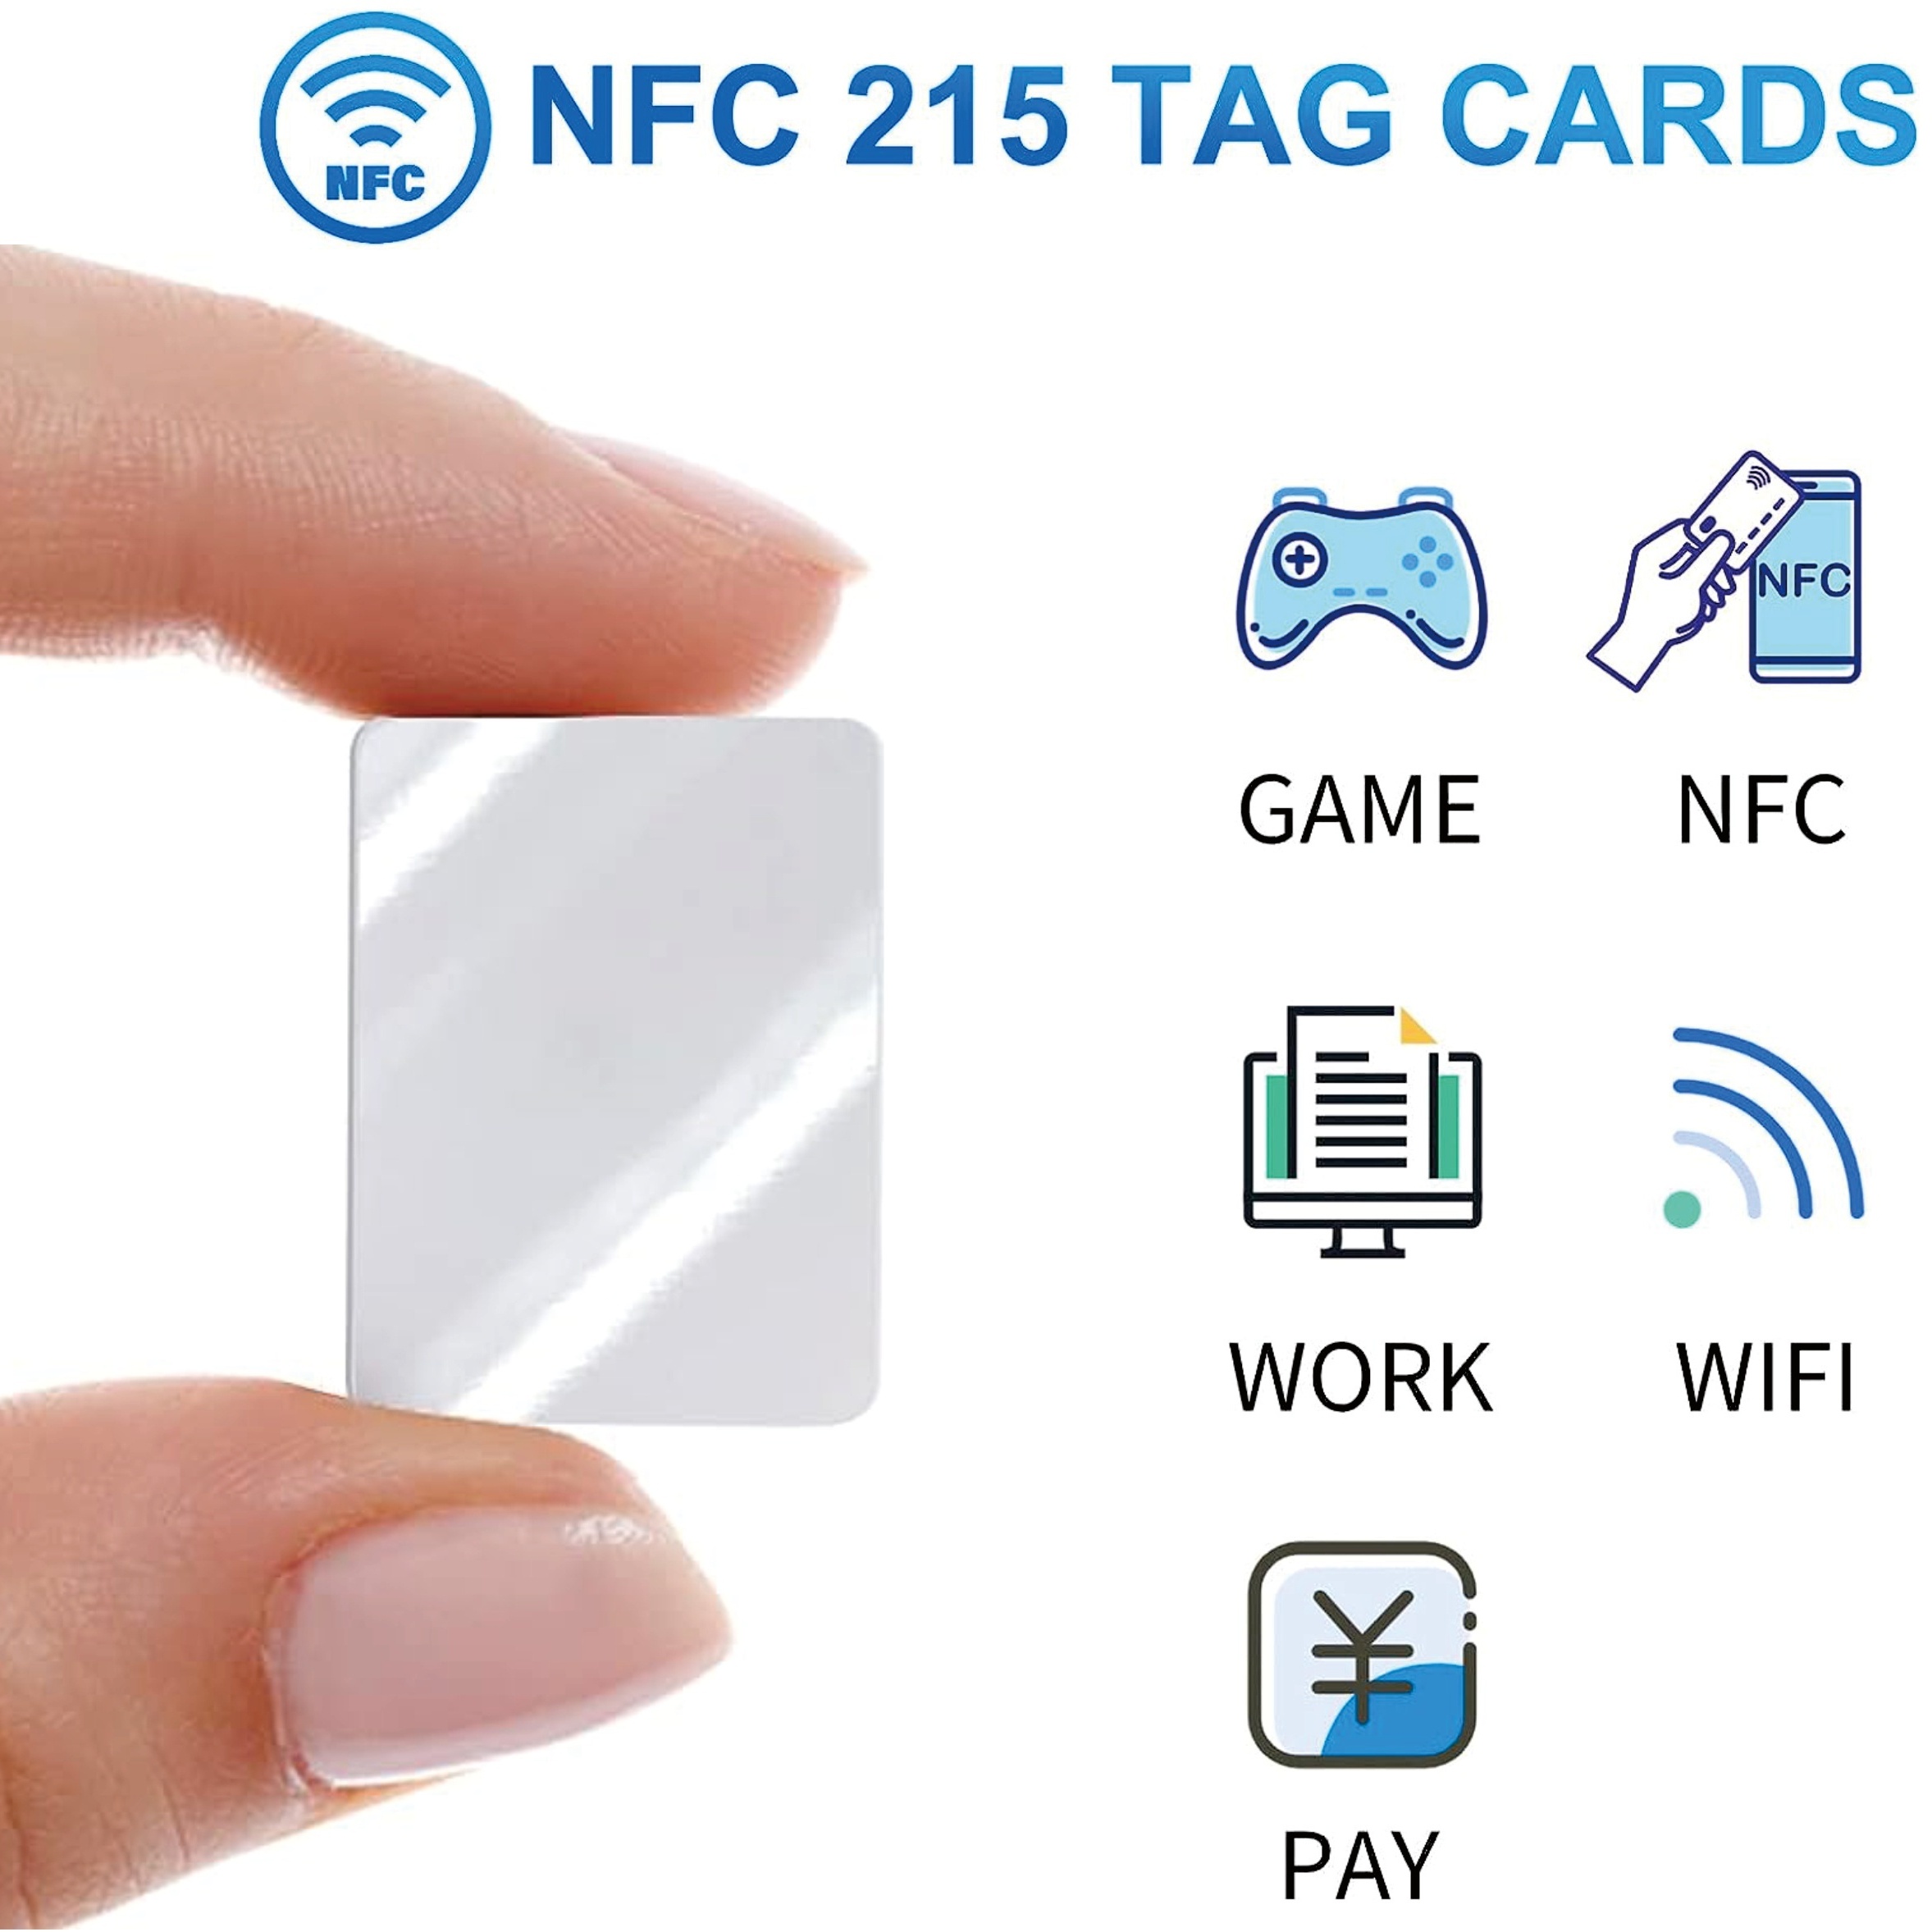  30pcs Anti-Metal NFC Tags NTAG215 Black NFC Tags Sticker  on-Metal NFC Tag NFC Stickers Anti Metal NFC Tag NFC Stickers Anti  Metal，Work Perfectly All NFC-Enabled Cell Phones &Devices(25mm/1 inch) 